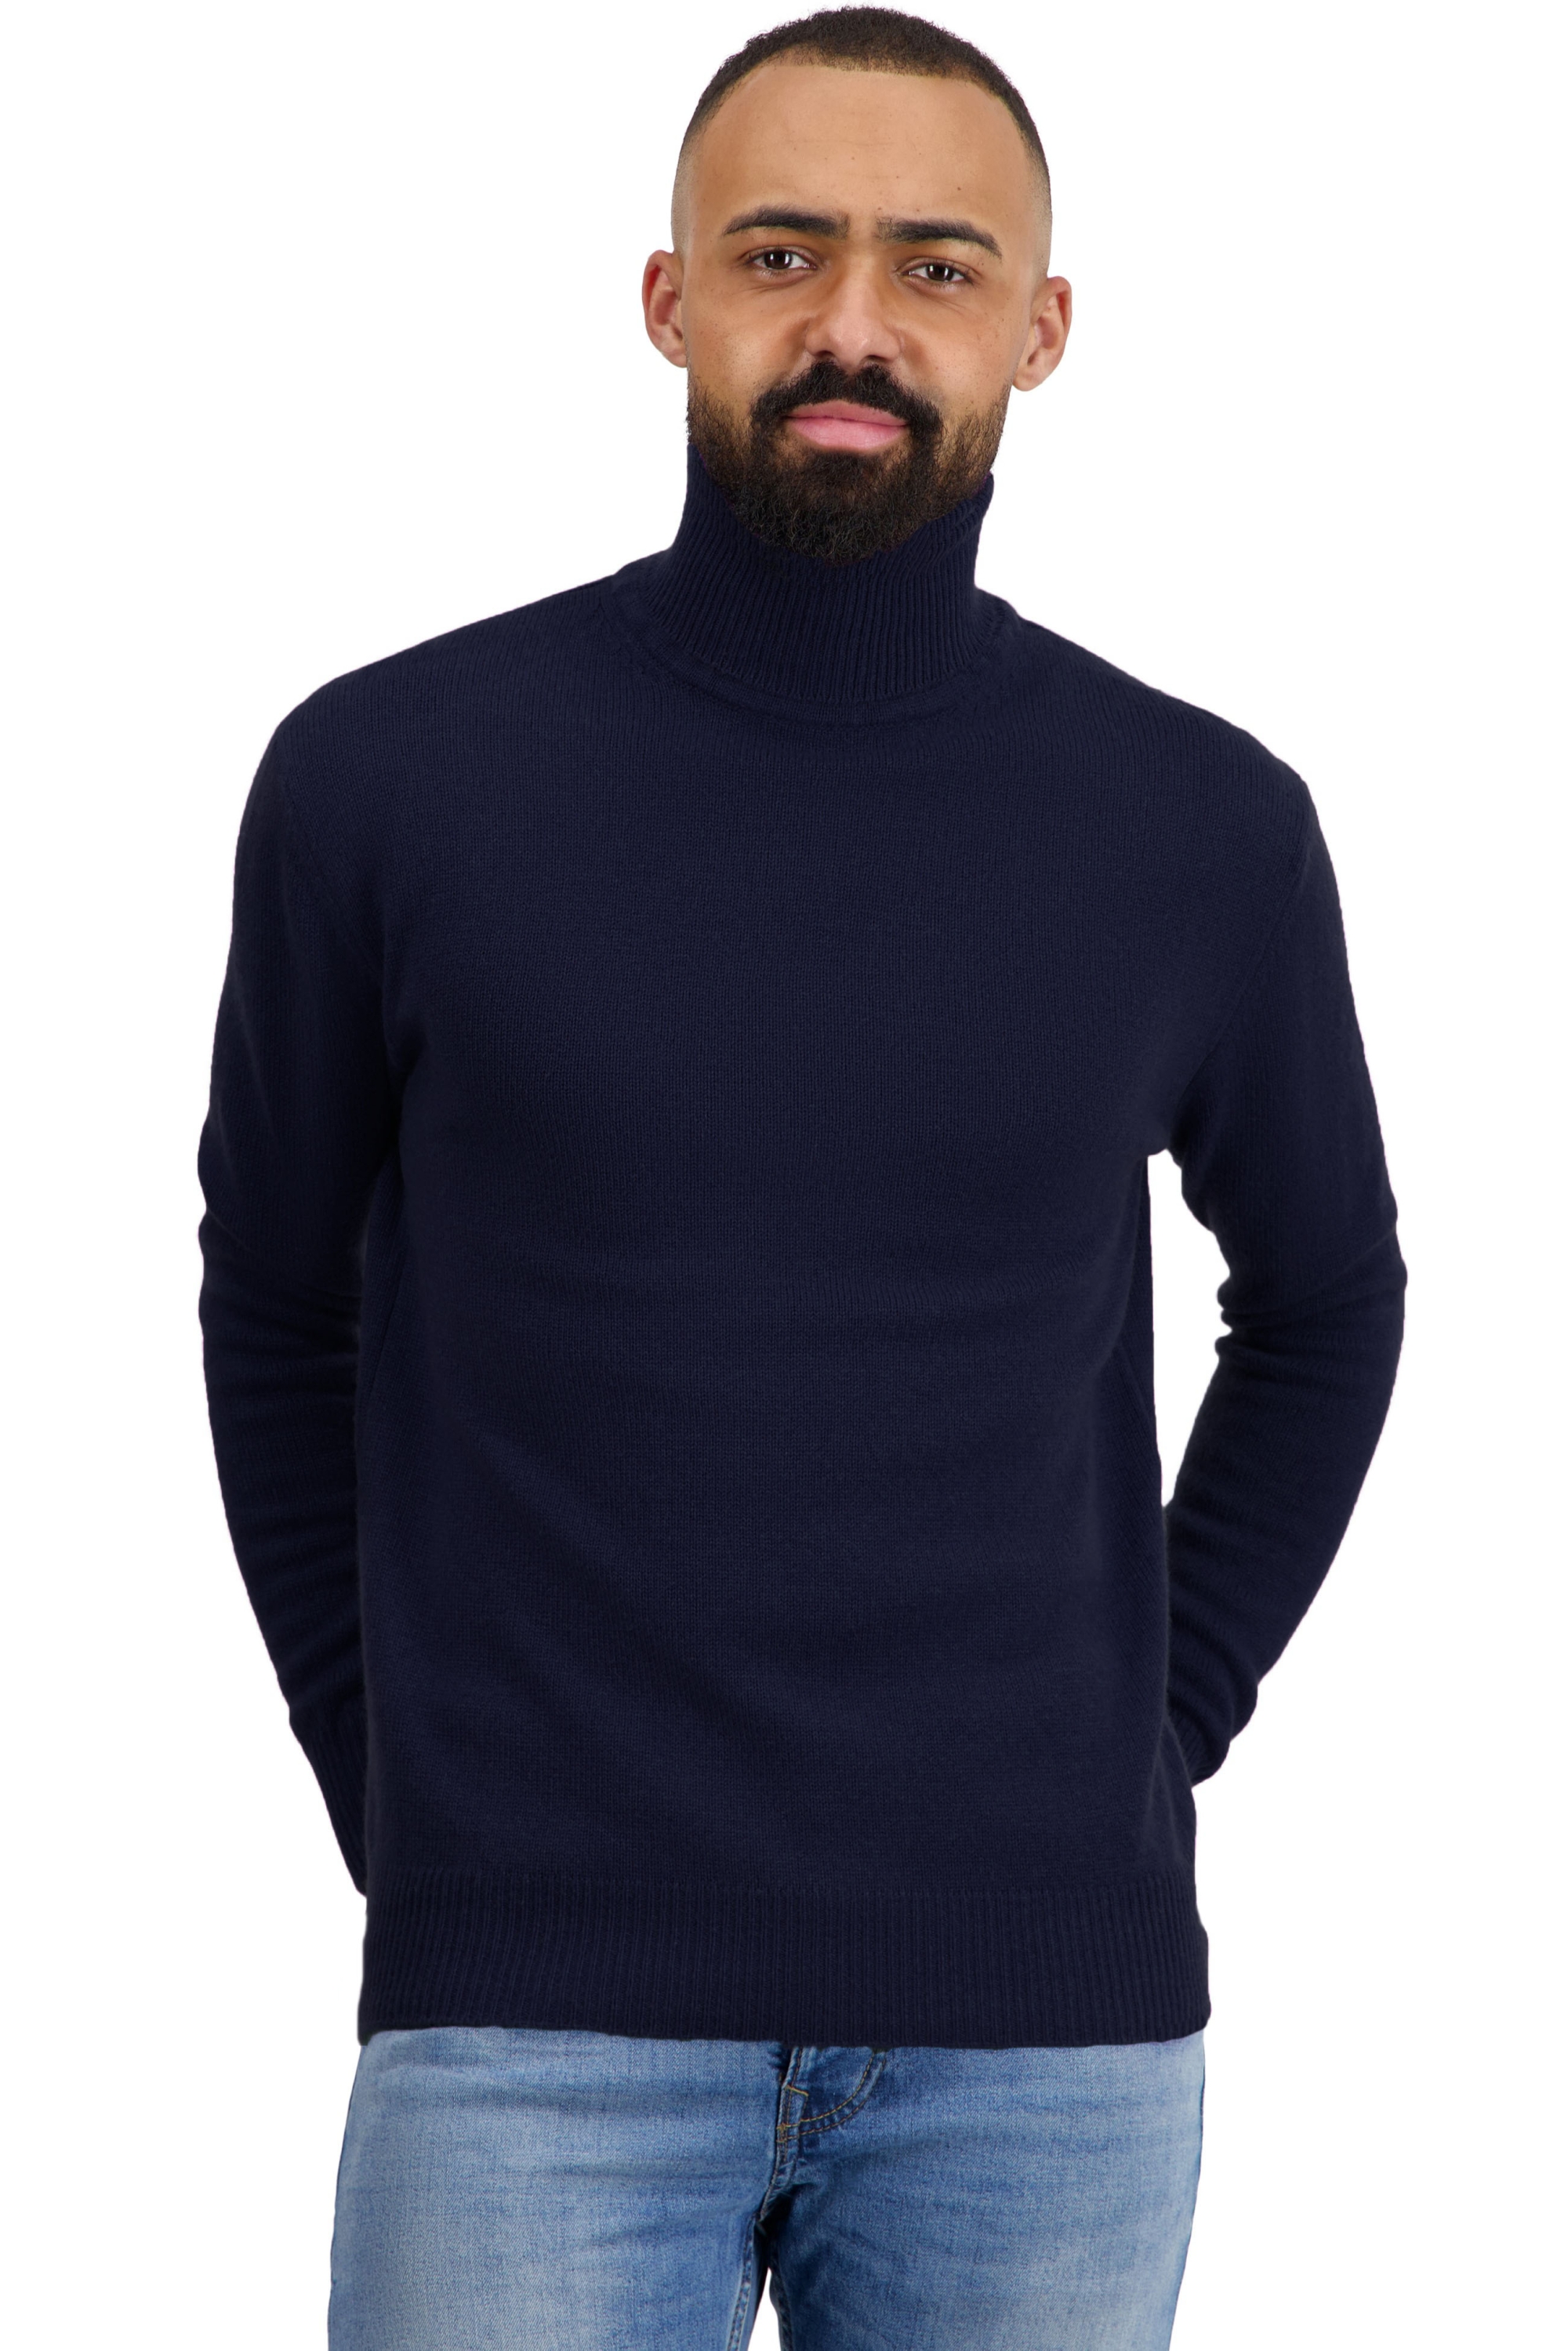 Cashmere men basic sweaters at low prices torino first dress blue s